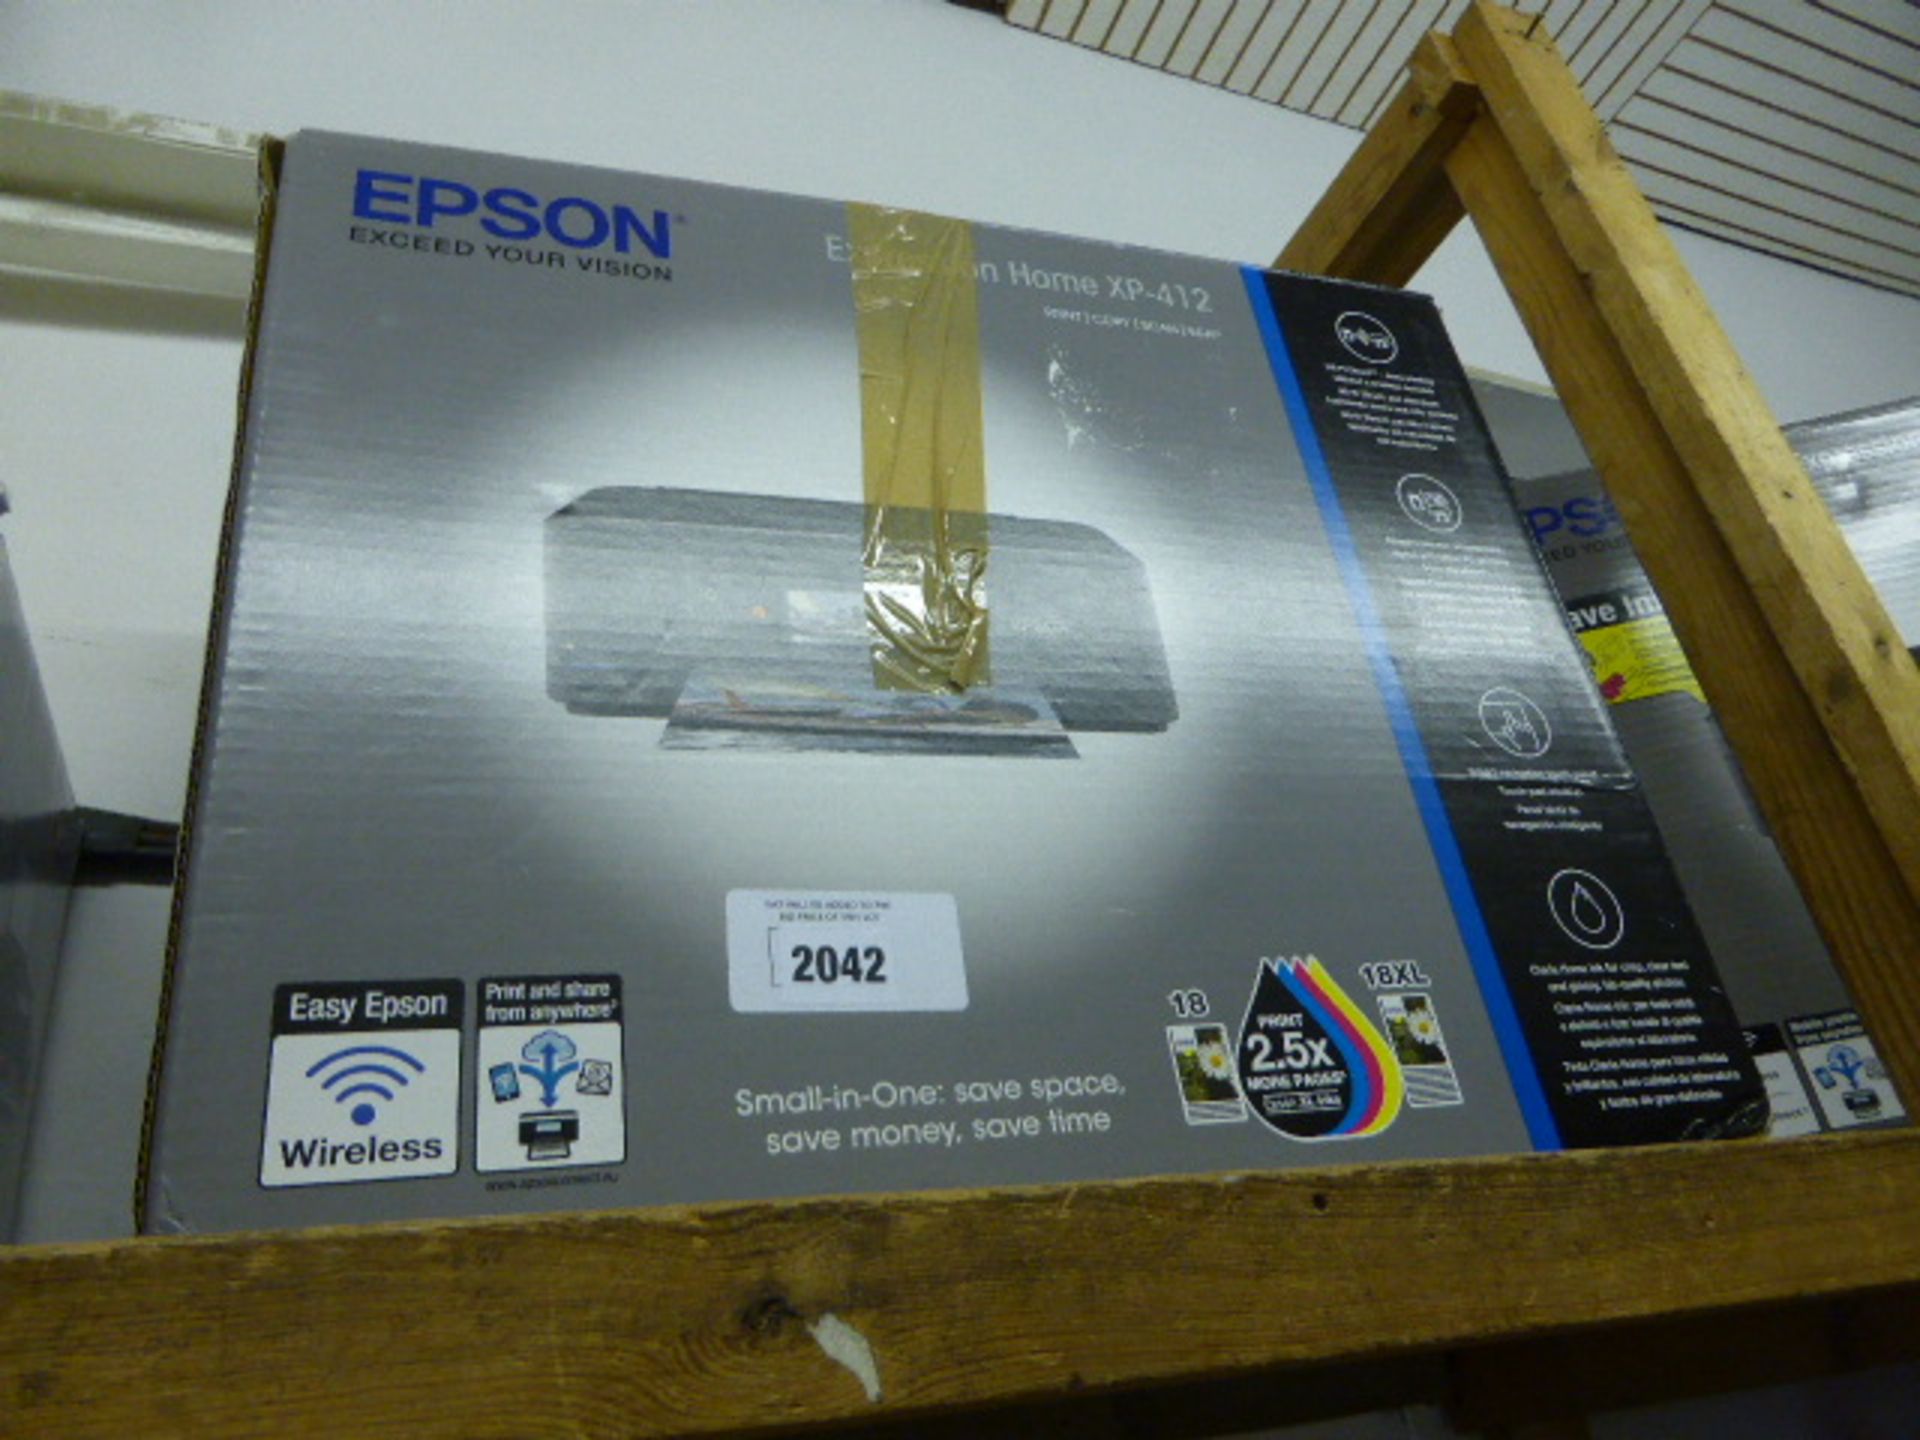 Epson Expression Home XP-412 wireless all in one printer in box